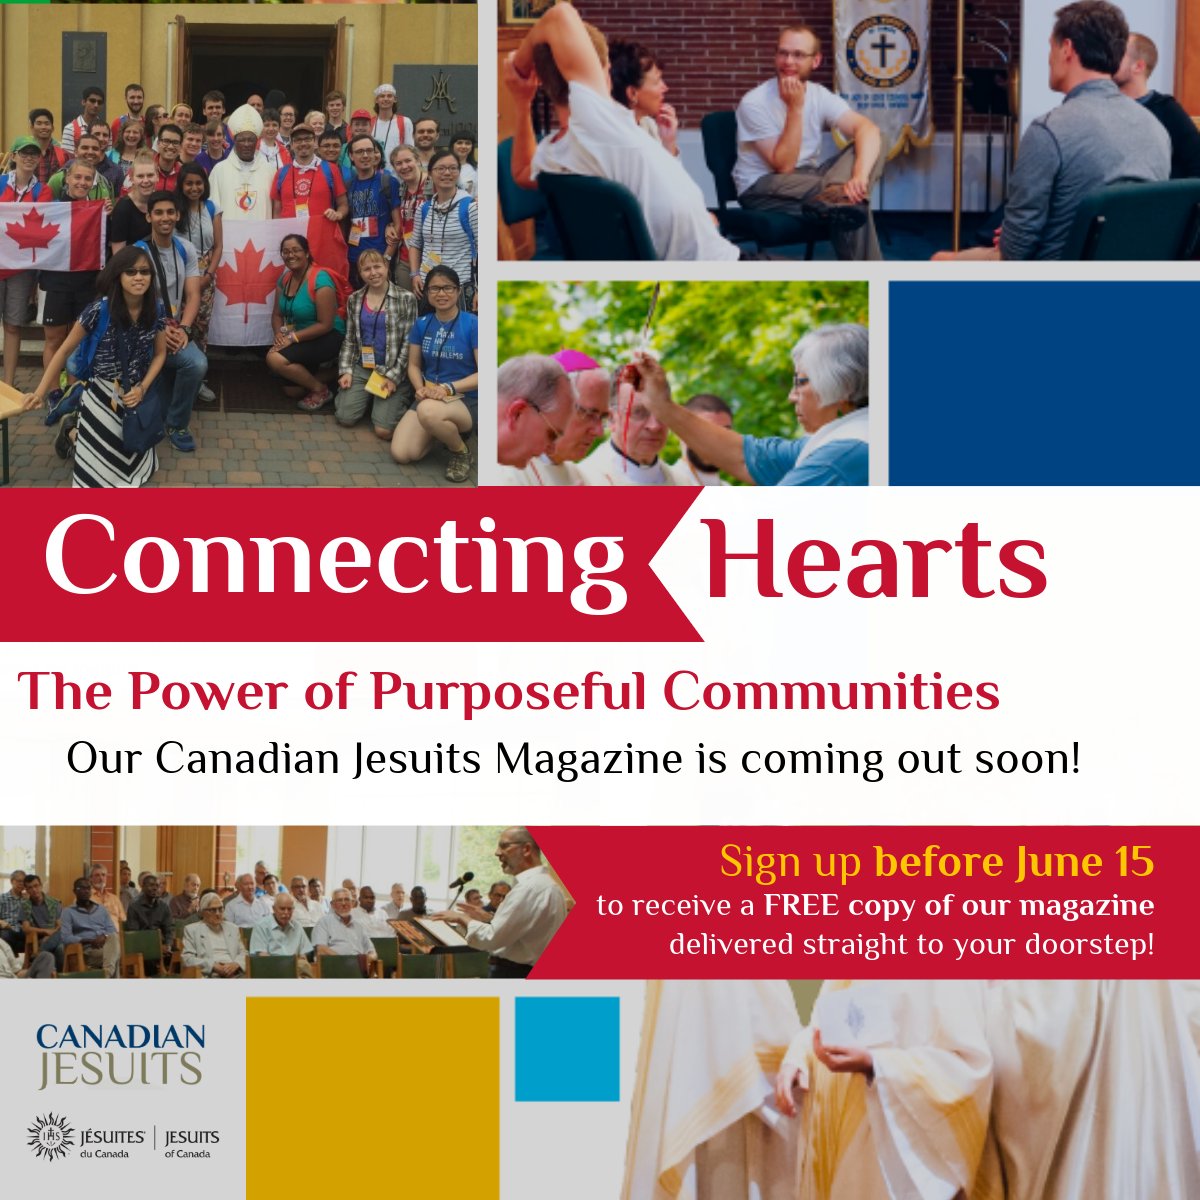 📣 The Canadian Jesuits Magazine is coming soon!

Explore how we embody the Gospel by creating authentic, inclusive communities where each person is transformed by the Spirit. 🧎🏽

📬 Sign up before June 15 to get a FREE copy delivered to your doorstep! bit.ly/4bAPc3T